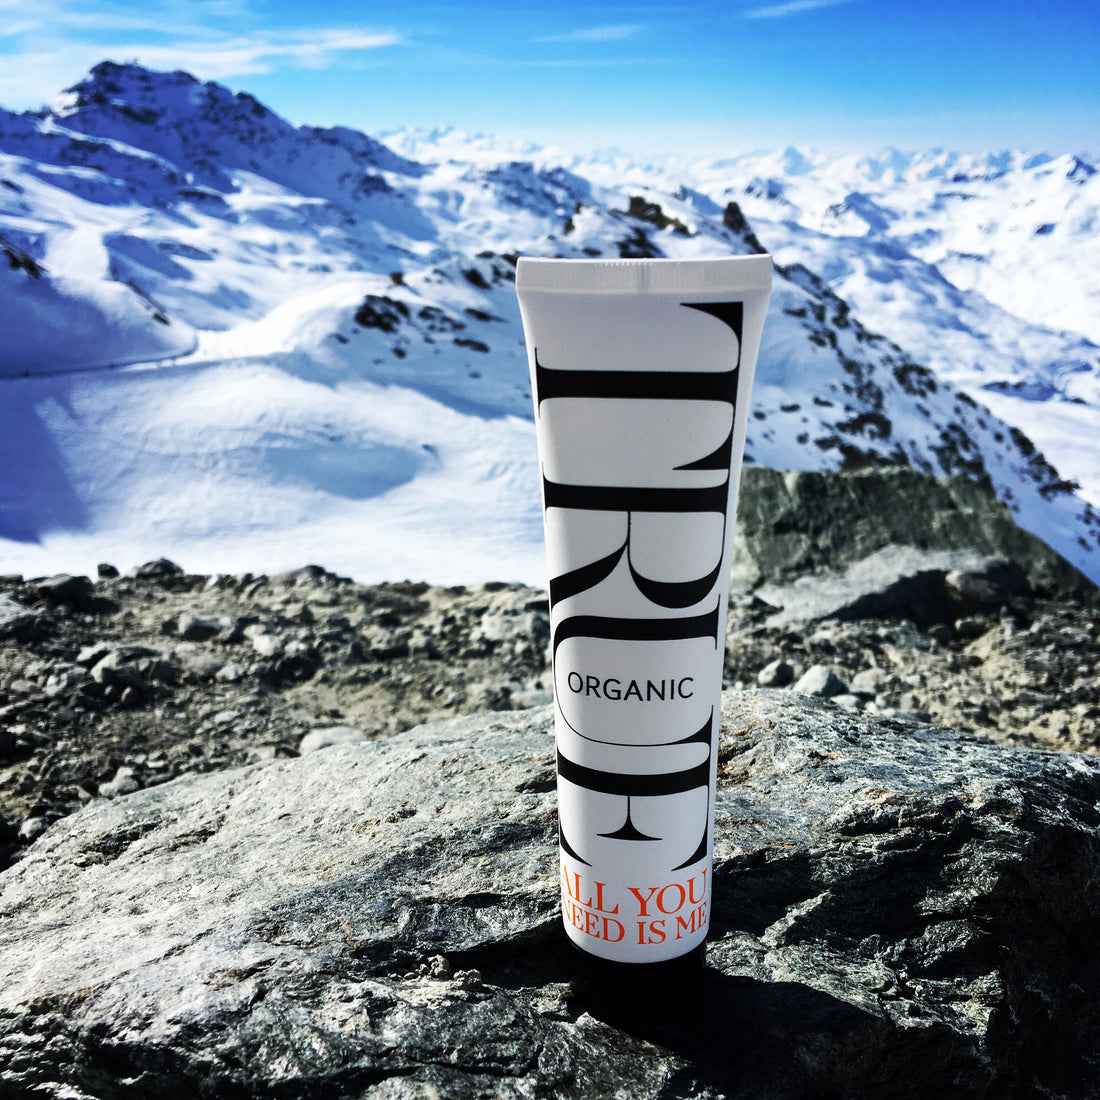 Must have for winter sports- All you need is me balm